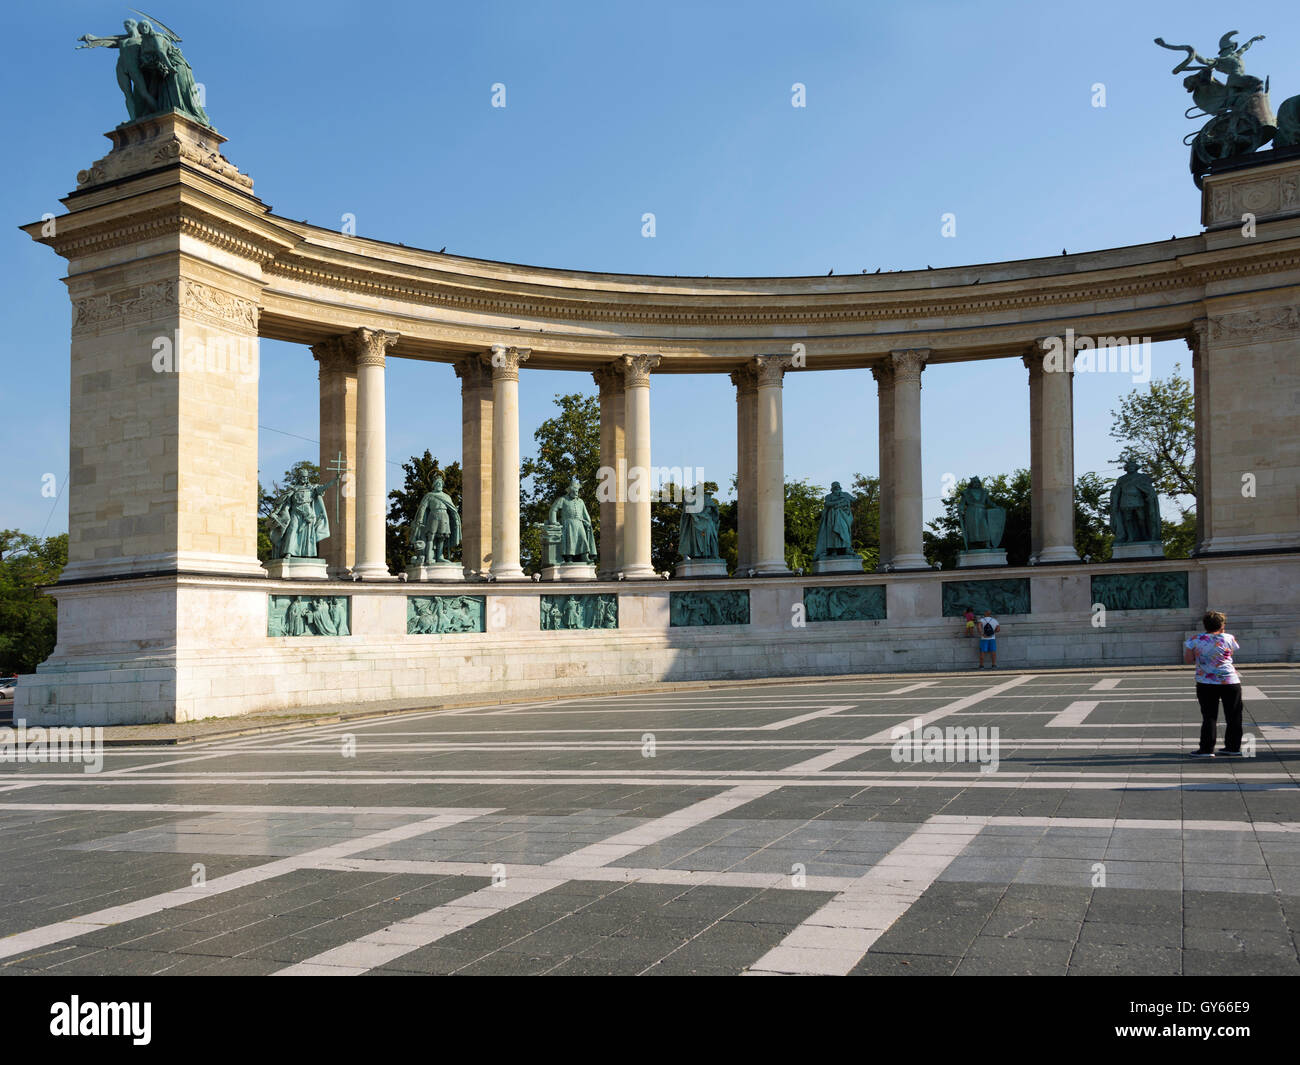 A tourist admiring one of the colonnades in Heroes Square. Stock Photo